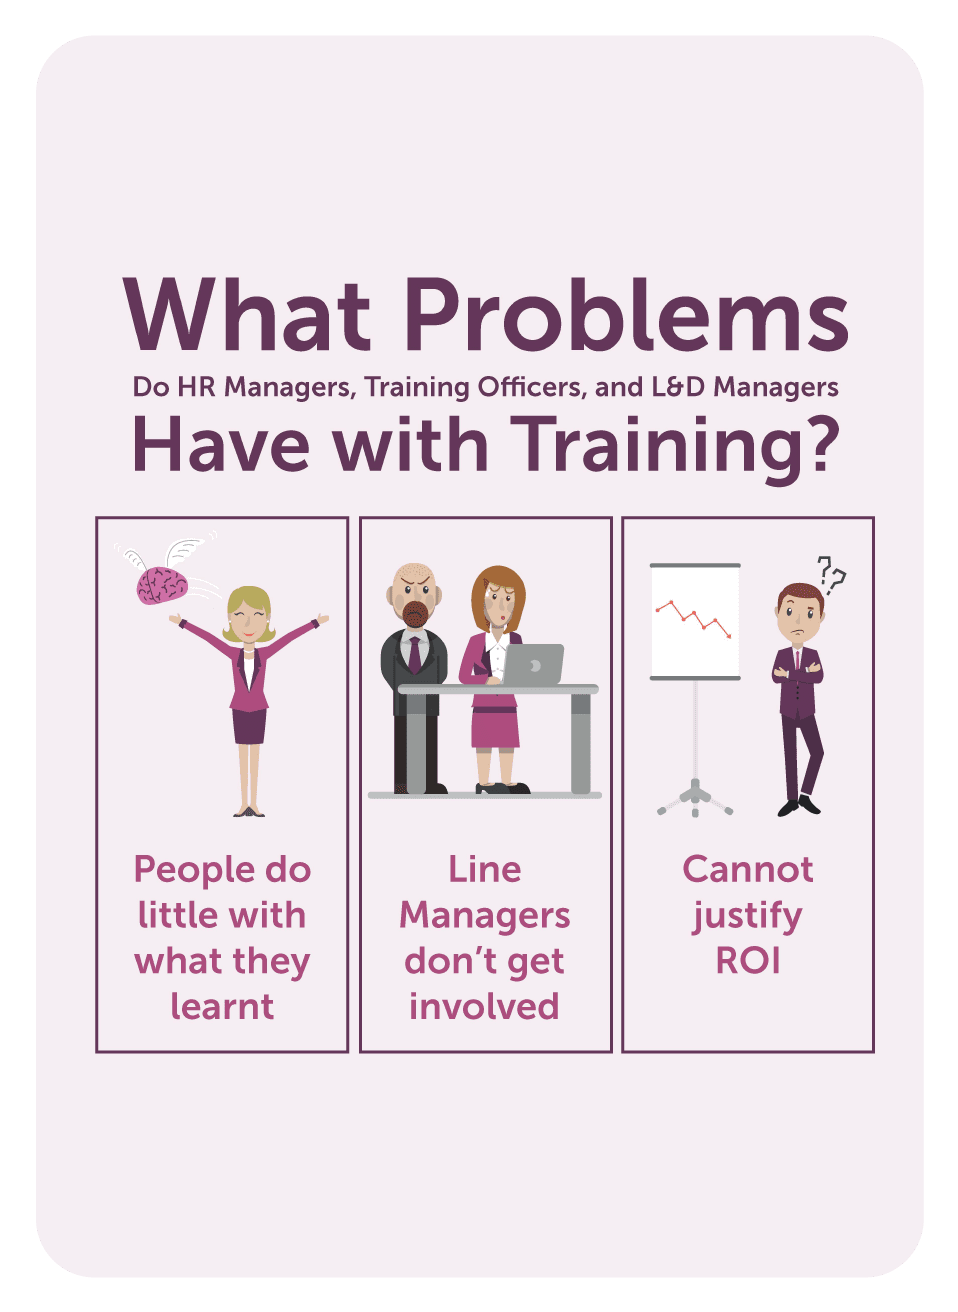 Category management coaching card titled What problems with training?